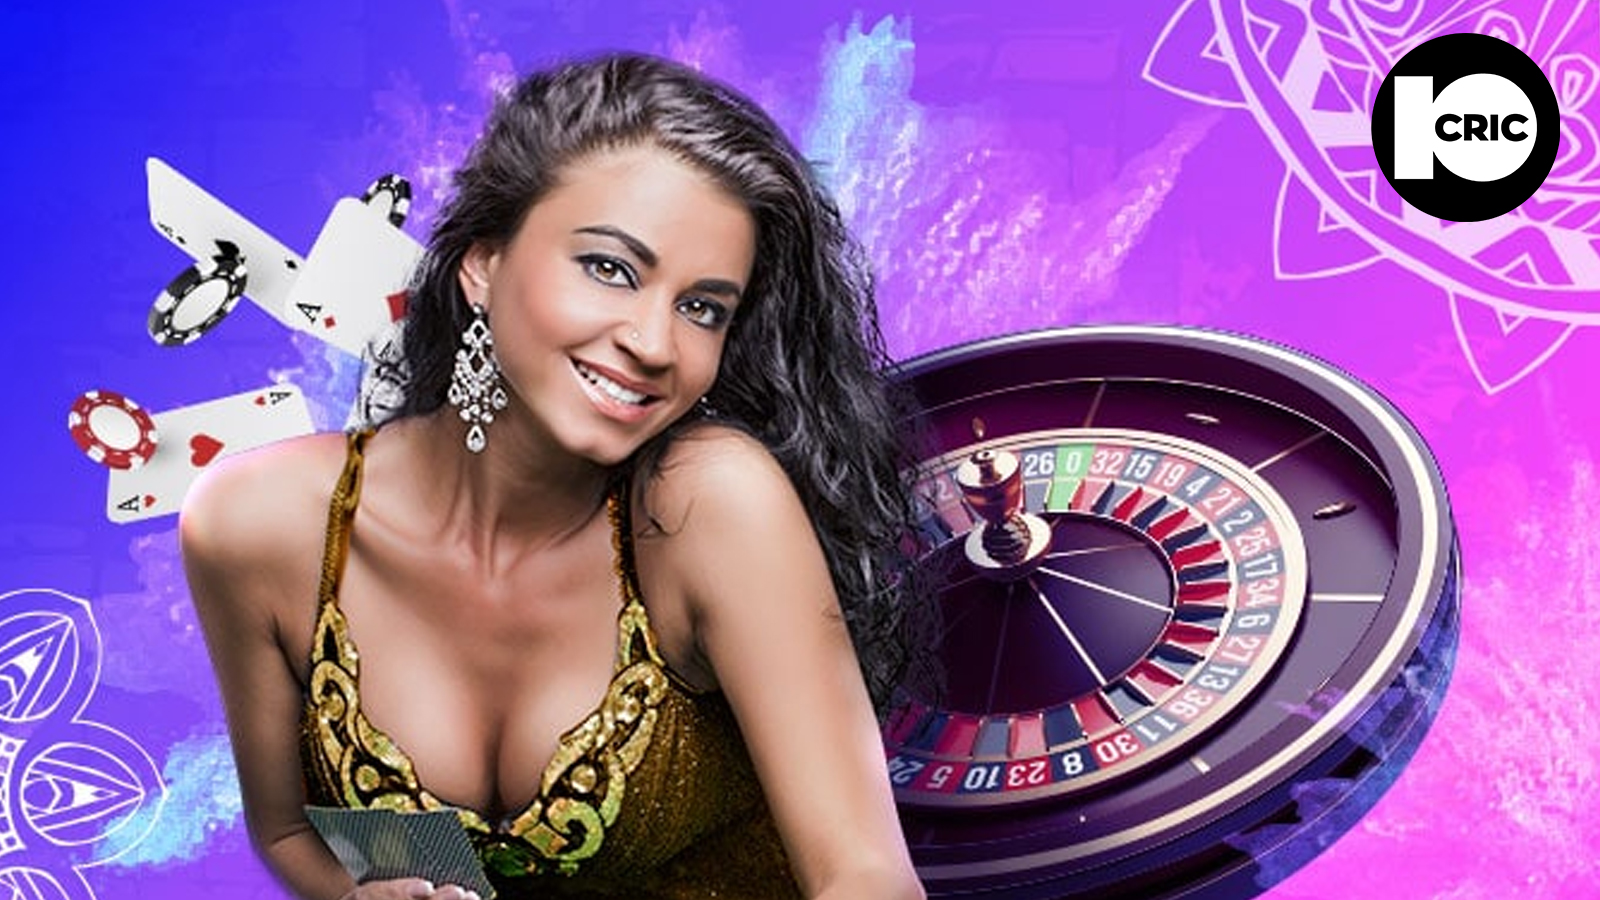 Sign up for 10cric casino and play live roulette.